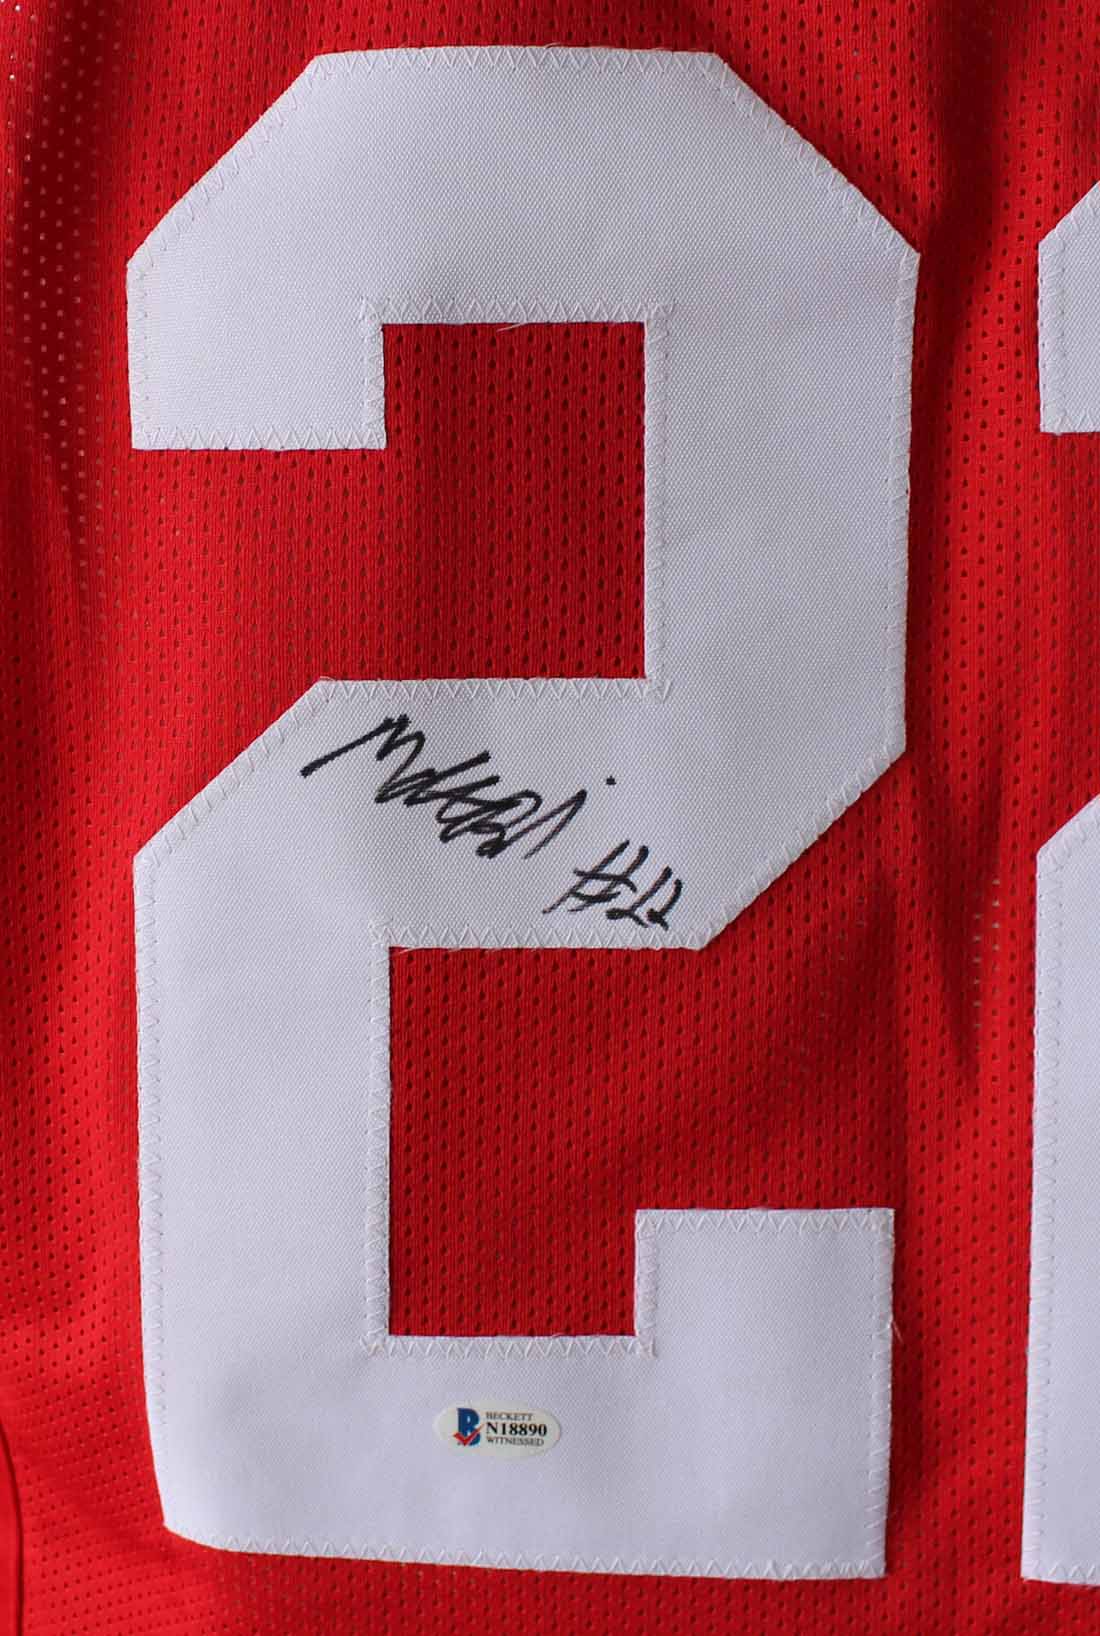 49ers autographed jersey